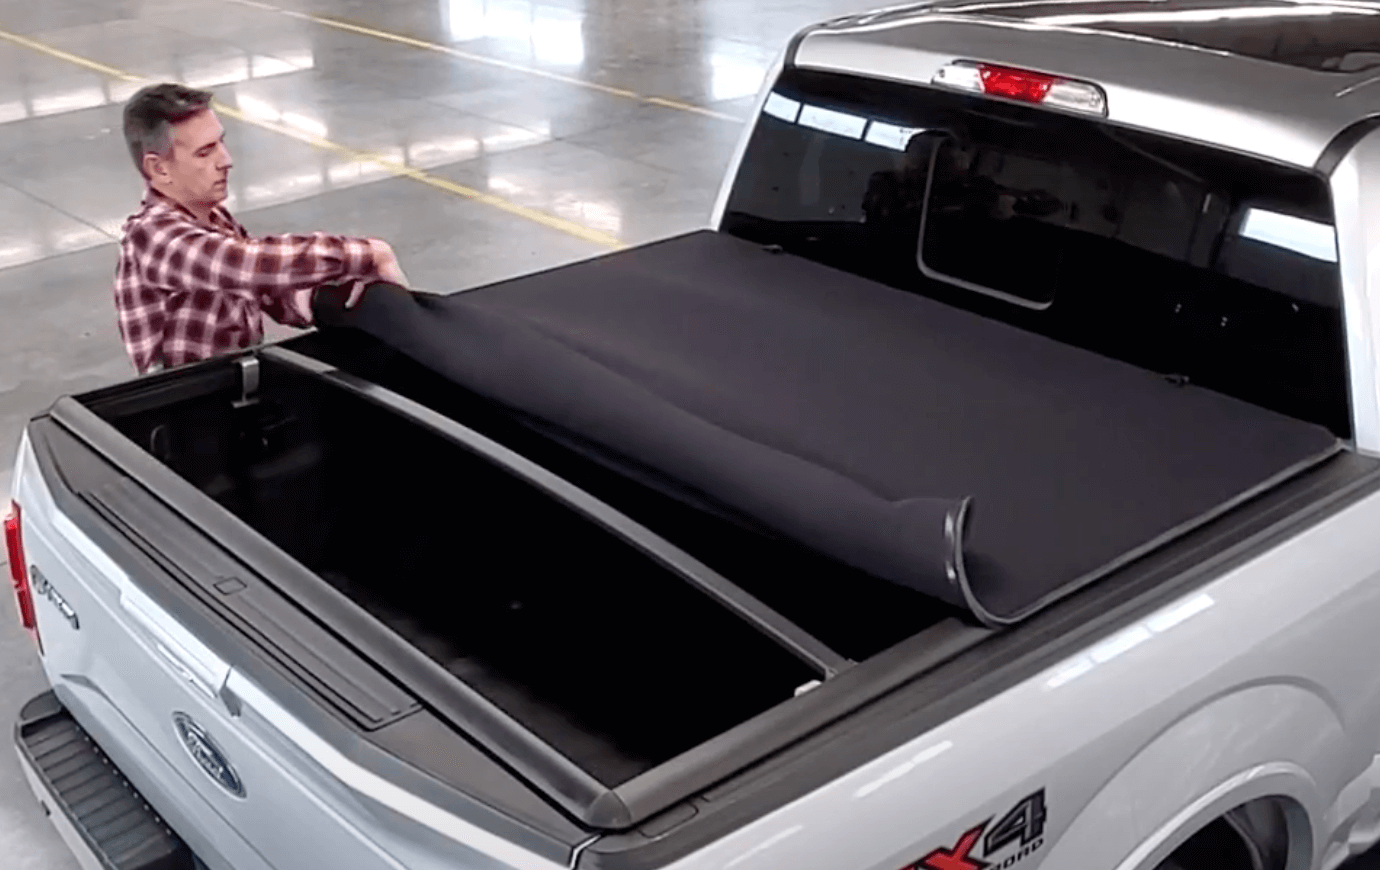 Rolling up Sawtooth Stretch expandable tonneau cover on a Chevrolet Colorado / GMC Canyon.